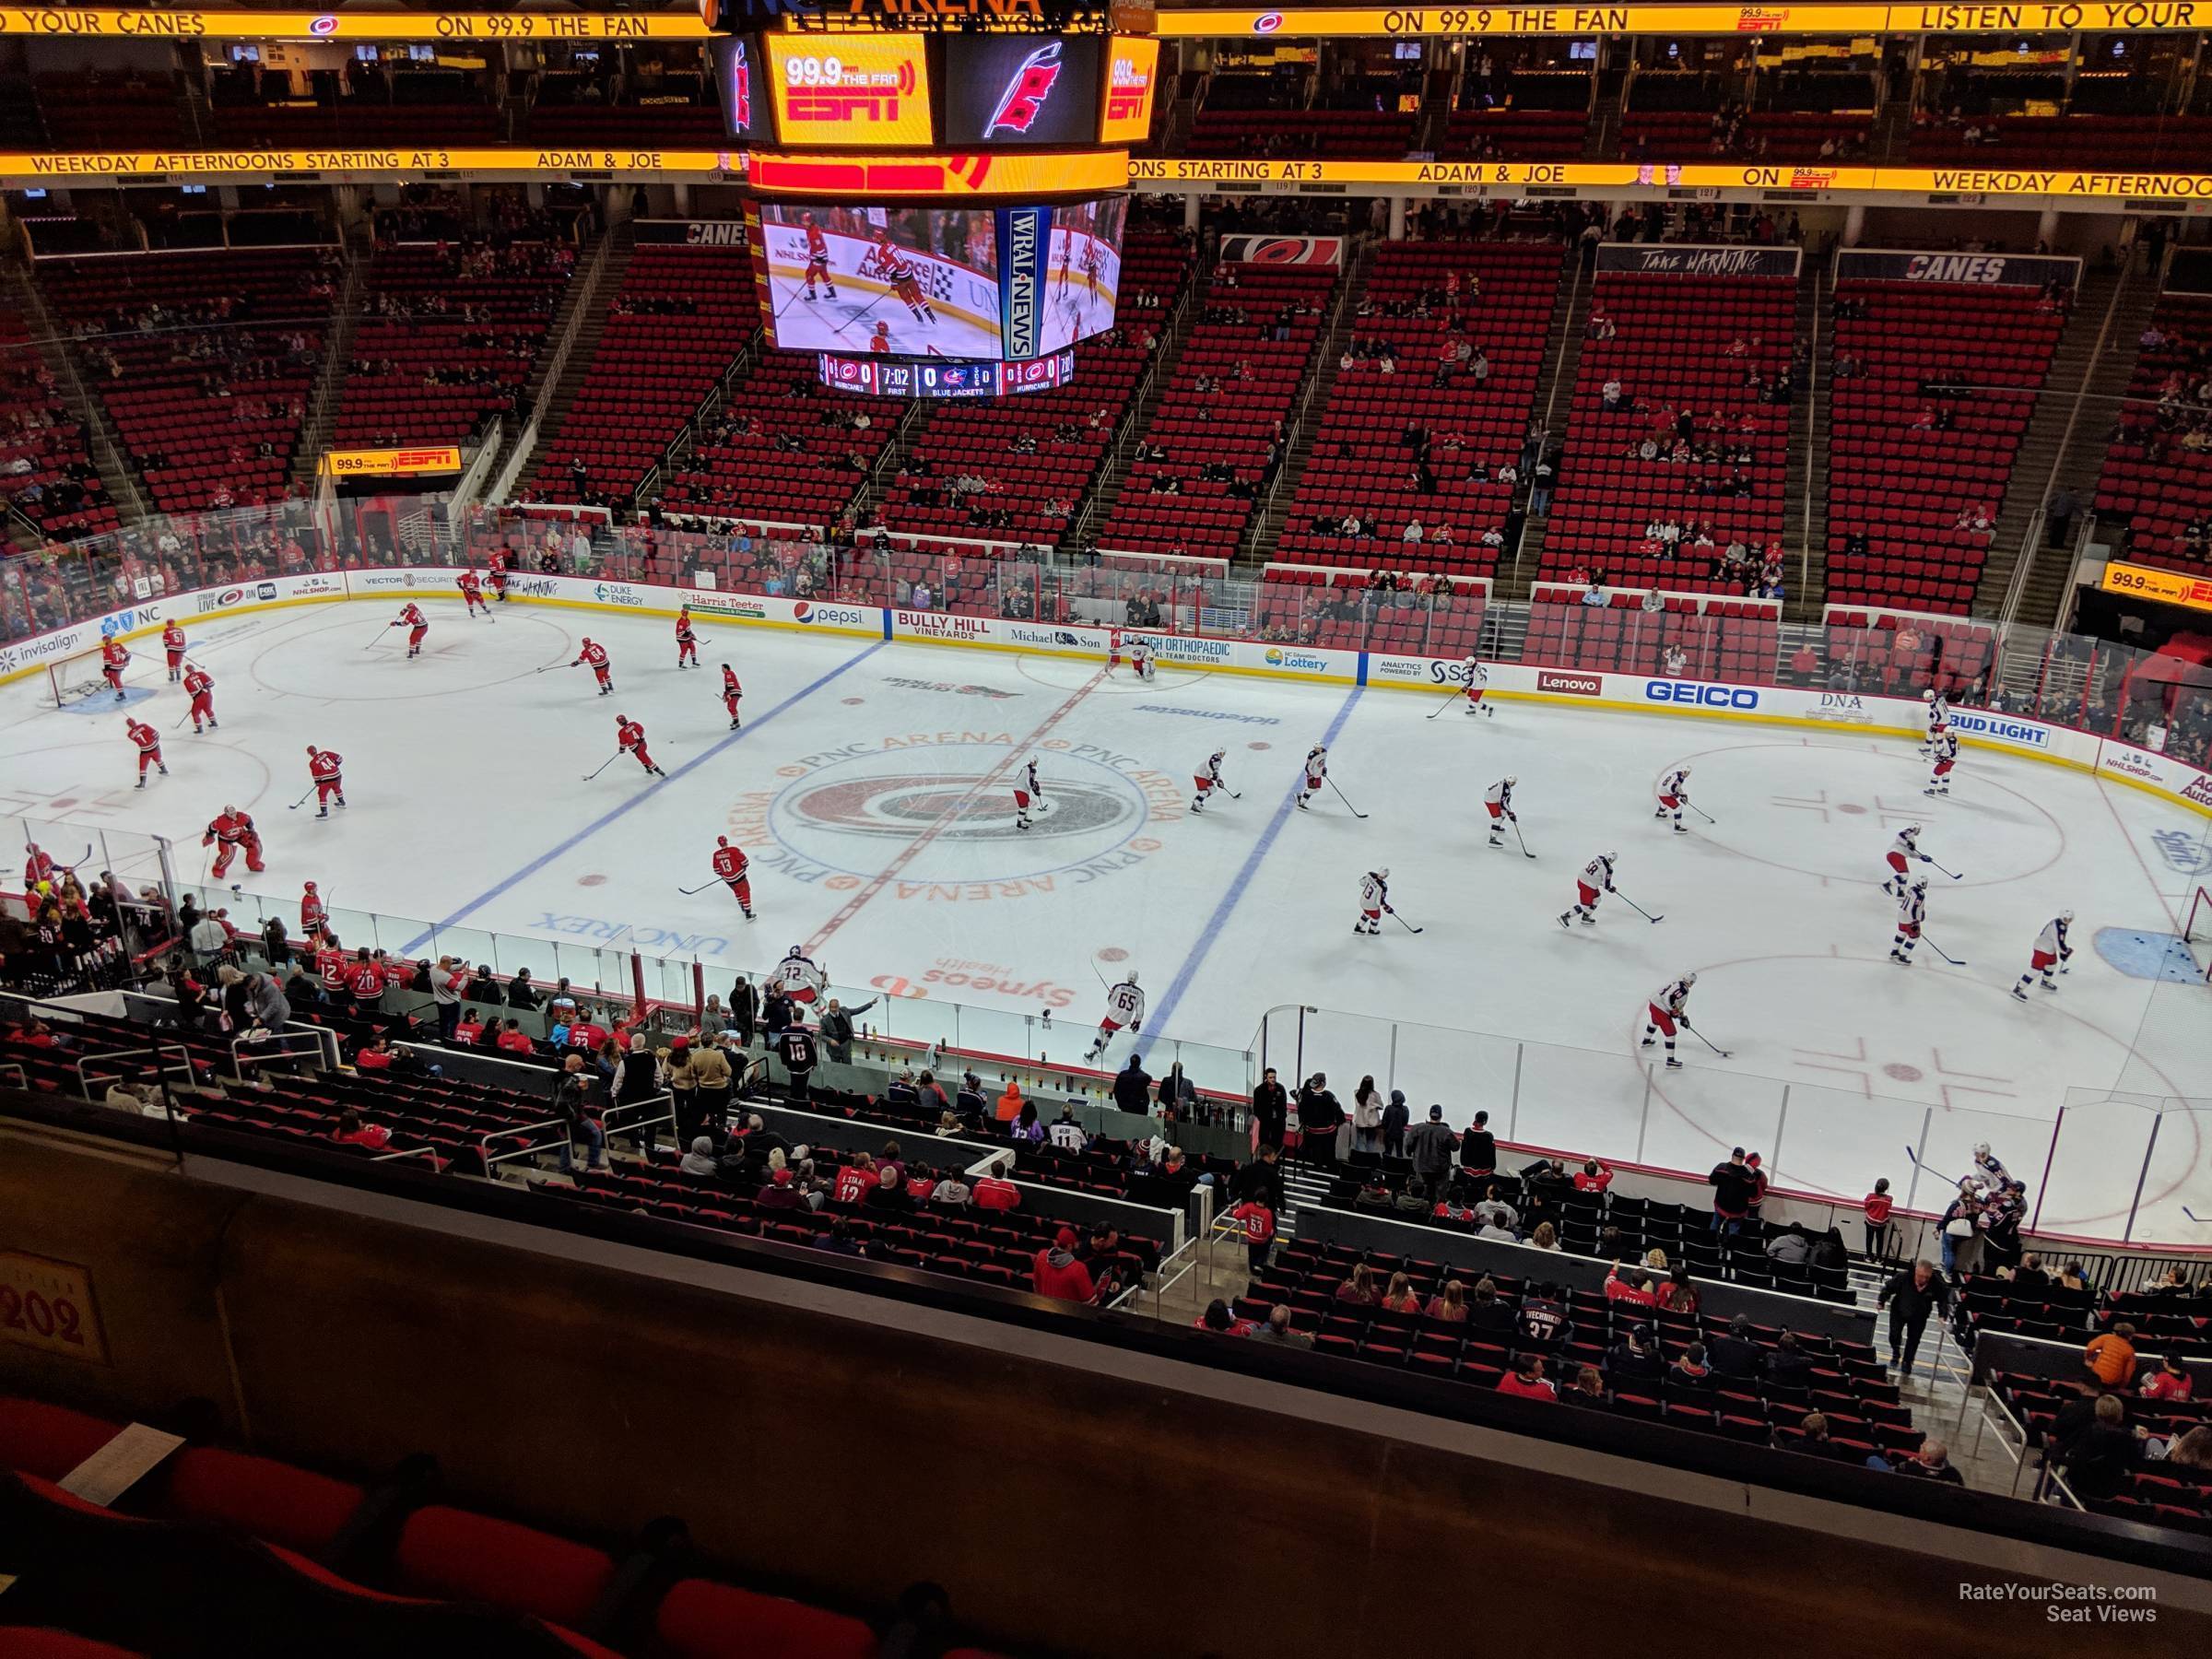 section 202, row d seat view  for hockey - pnc arena